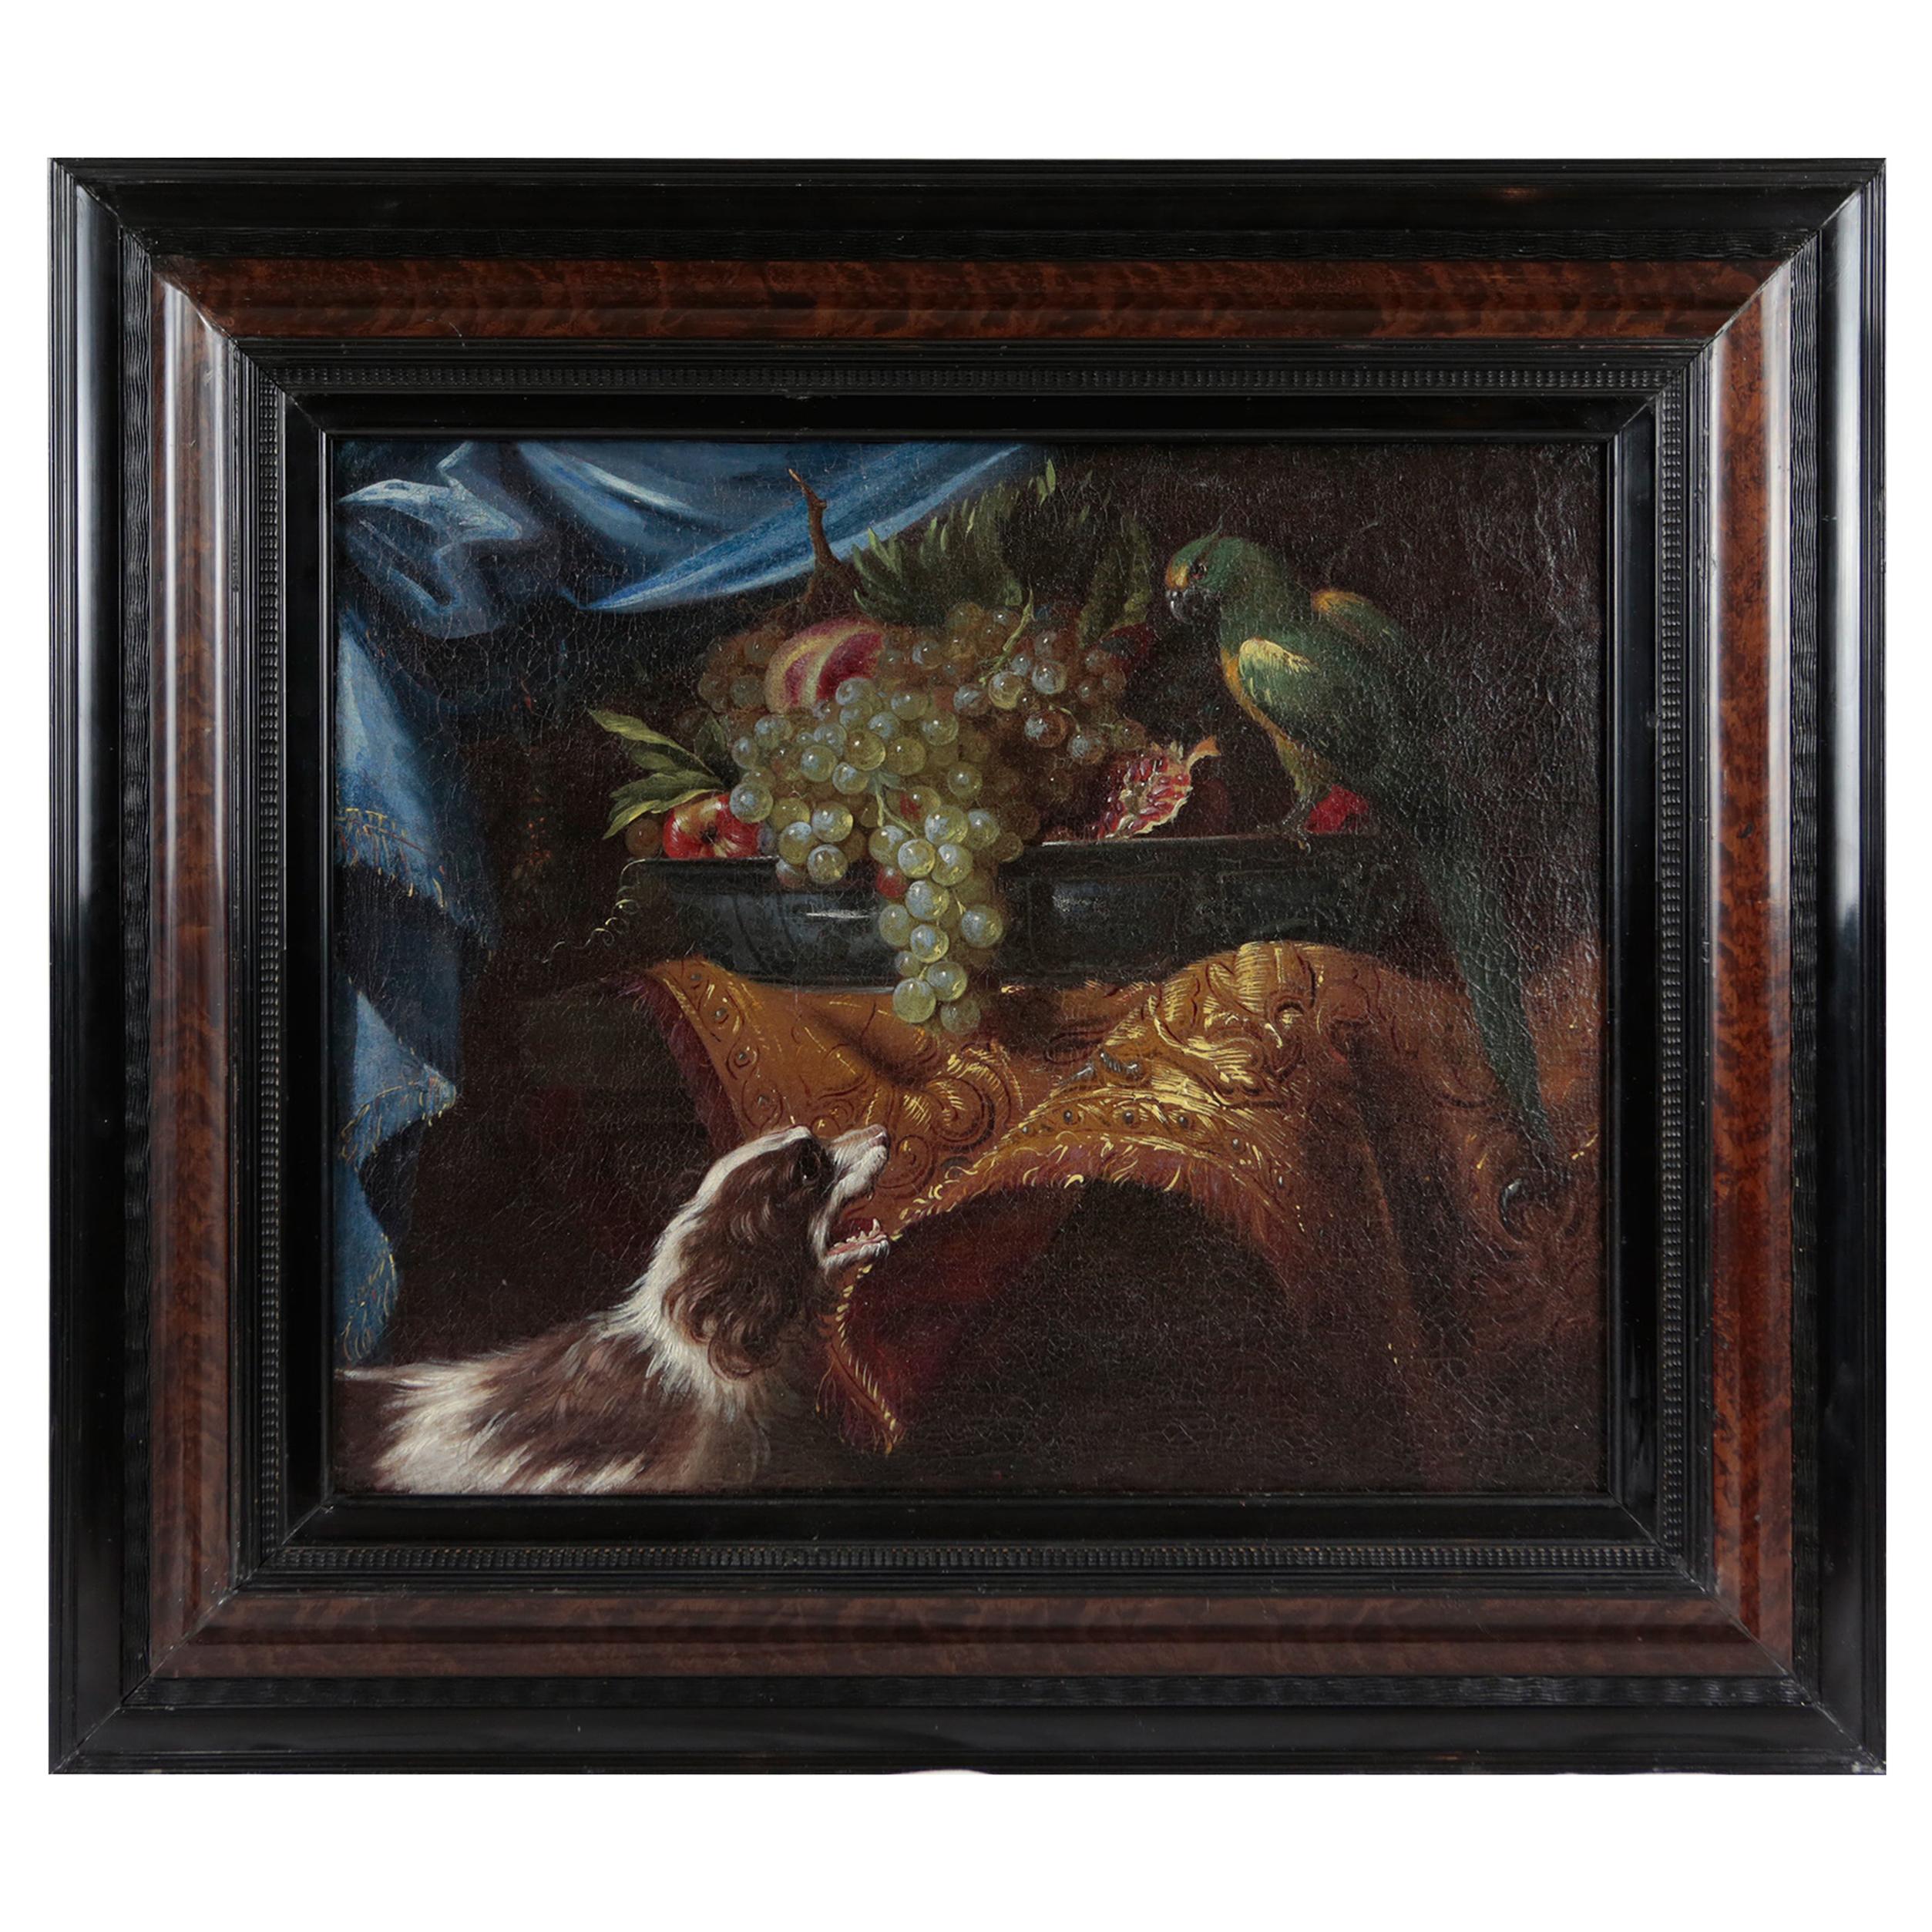 Flemish 17th Century Oil Painting with Dog & Parrot, Still Life Painting, Framed For Sale